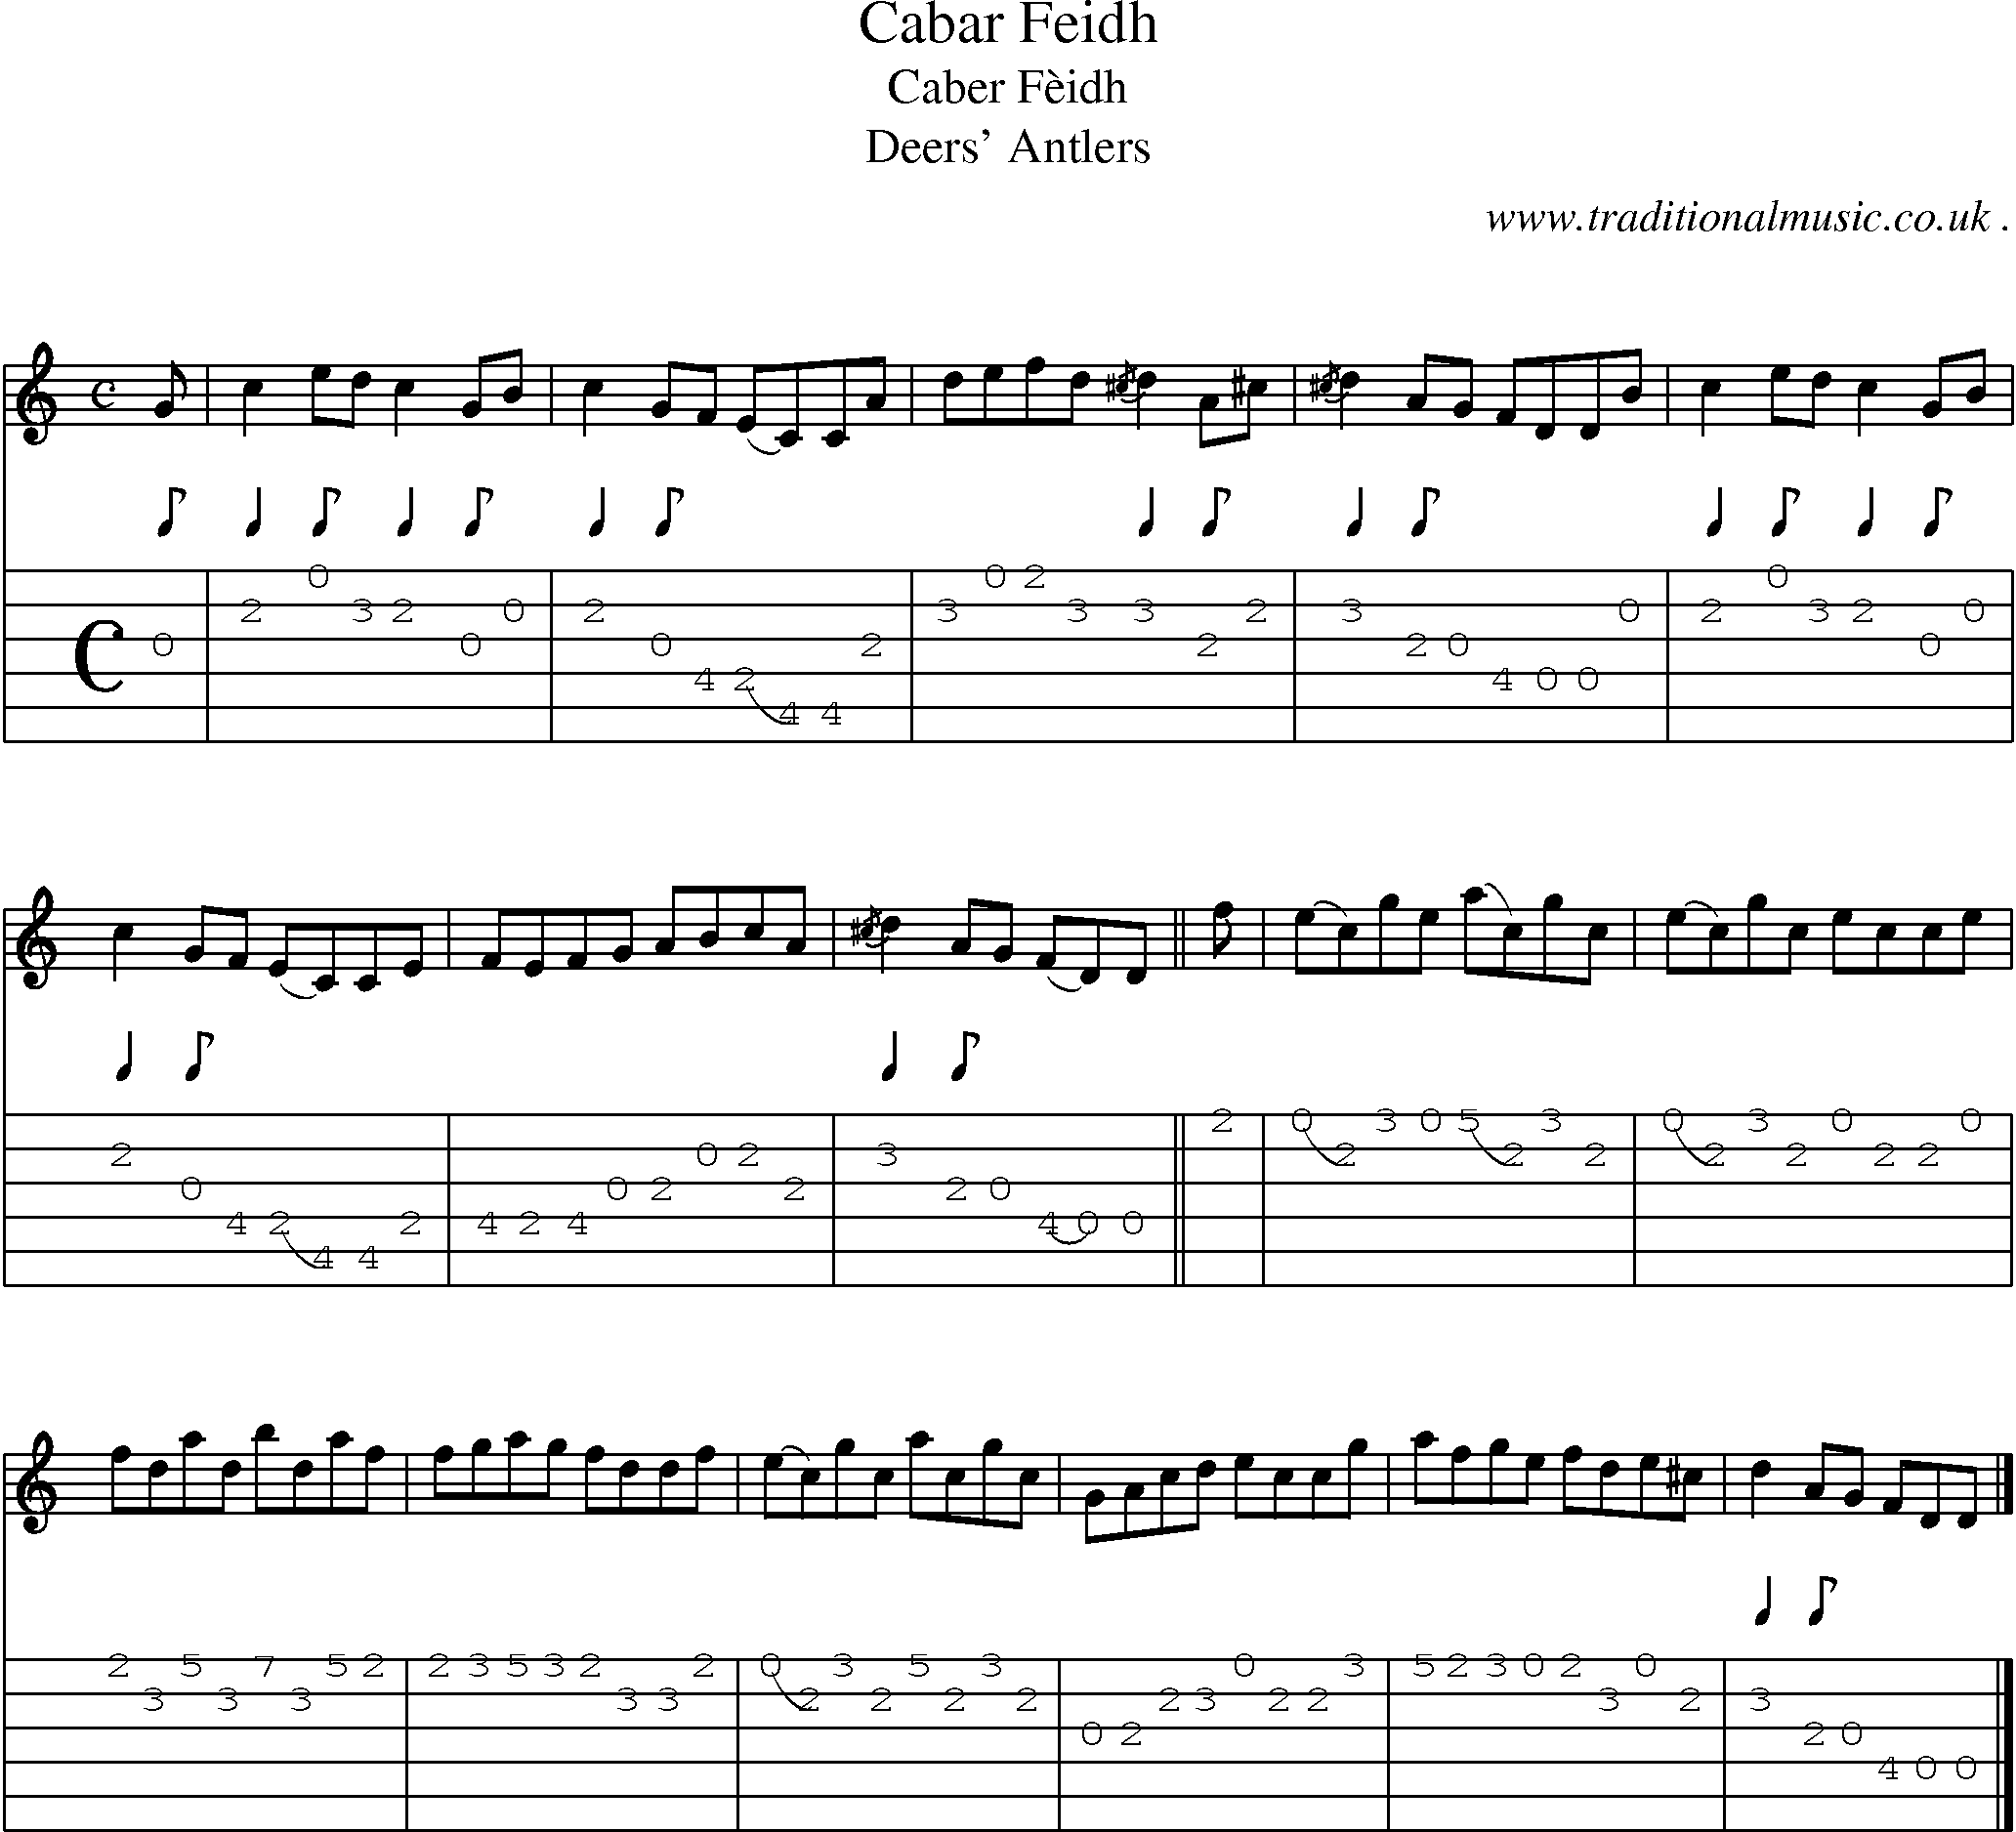 Sheet-music  score, Chords and Guitar Tabs for Cabar Feidh